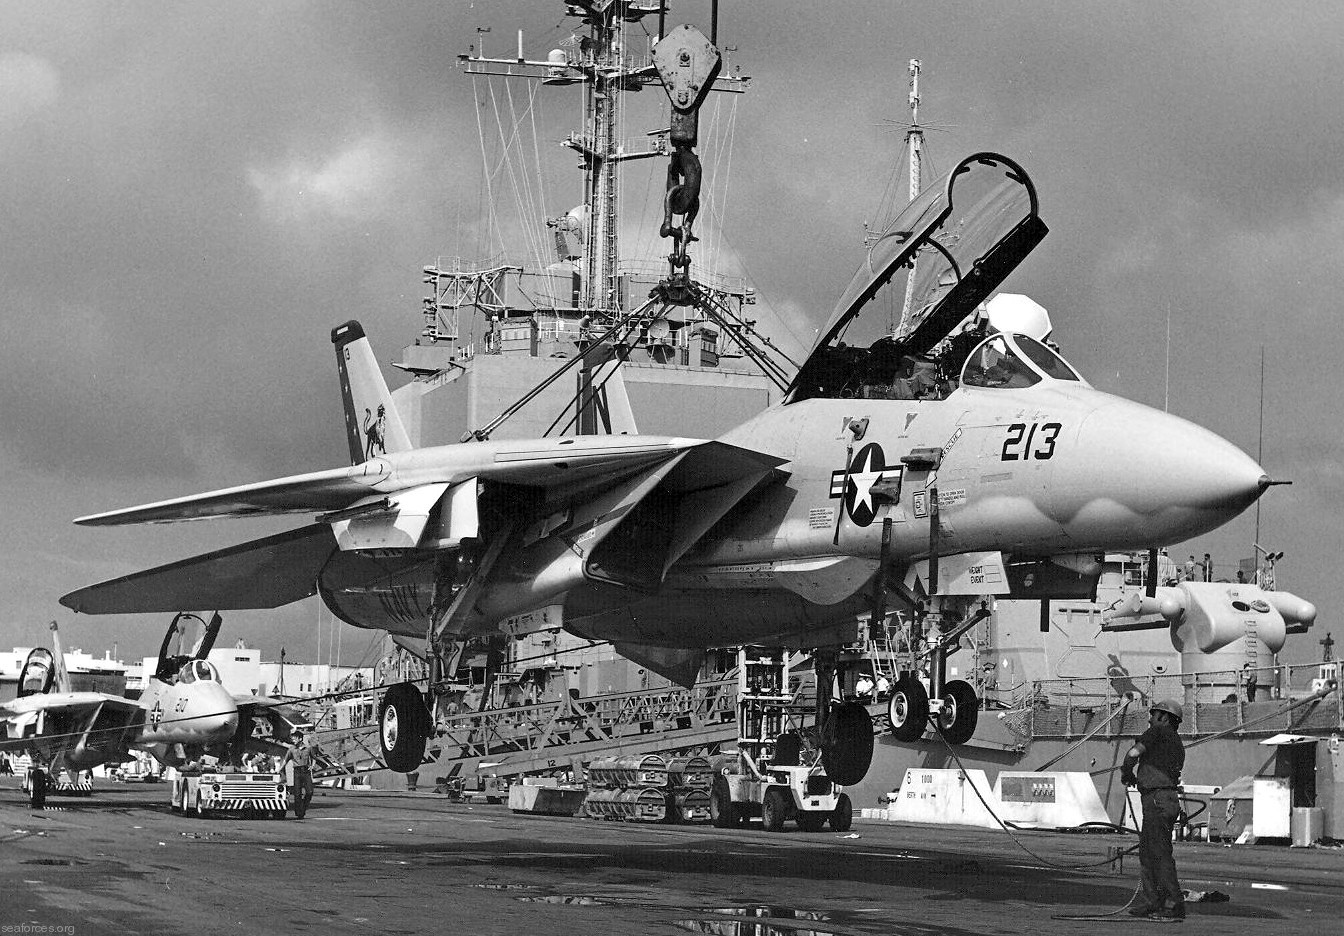 vf-213 black lions fighter squadron us navy f-14a tomcat carrier air wing cvw-11 uss kitty hawk cv-63 107